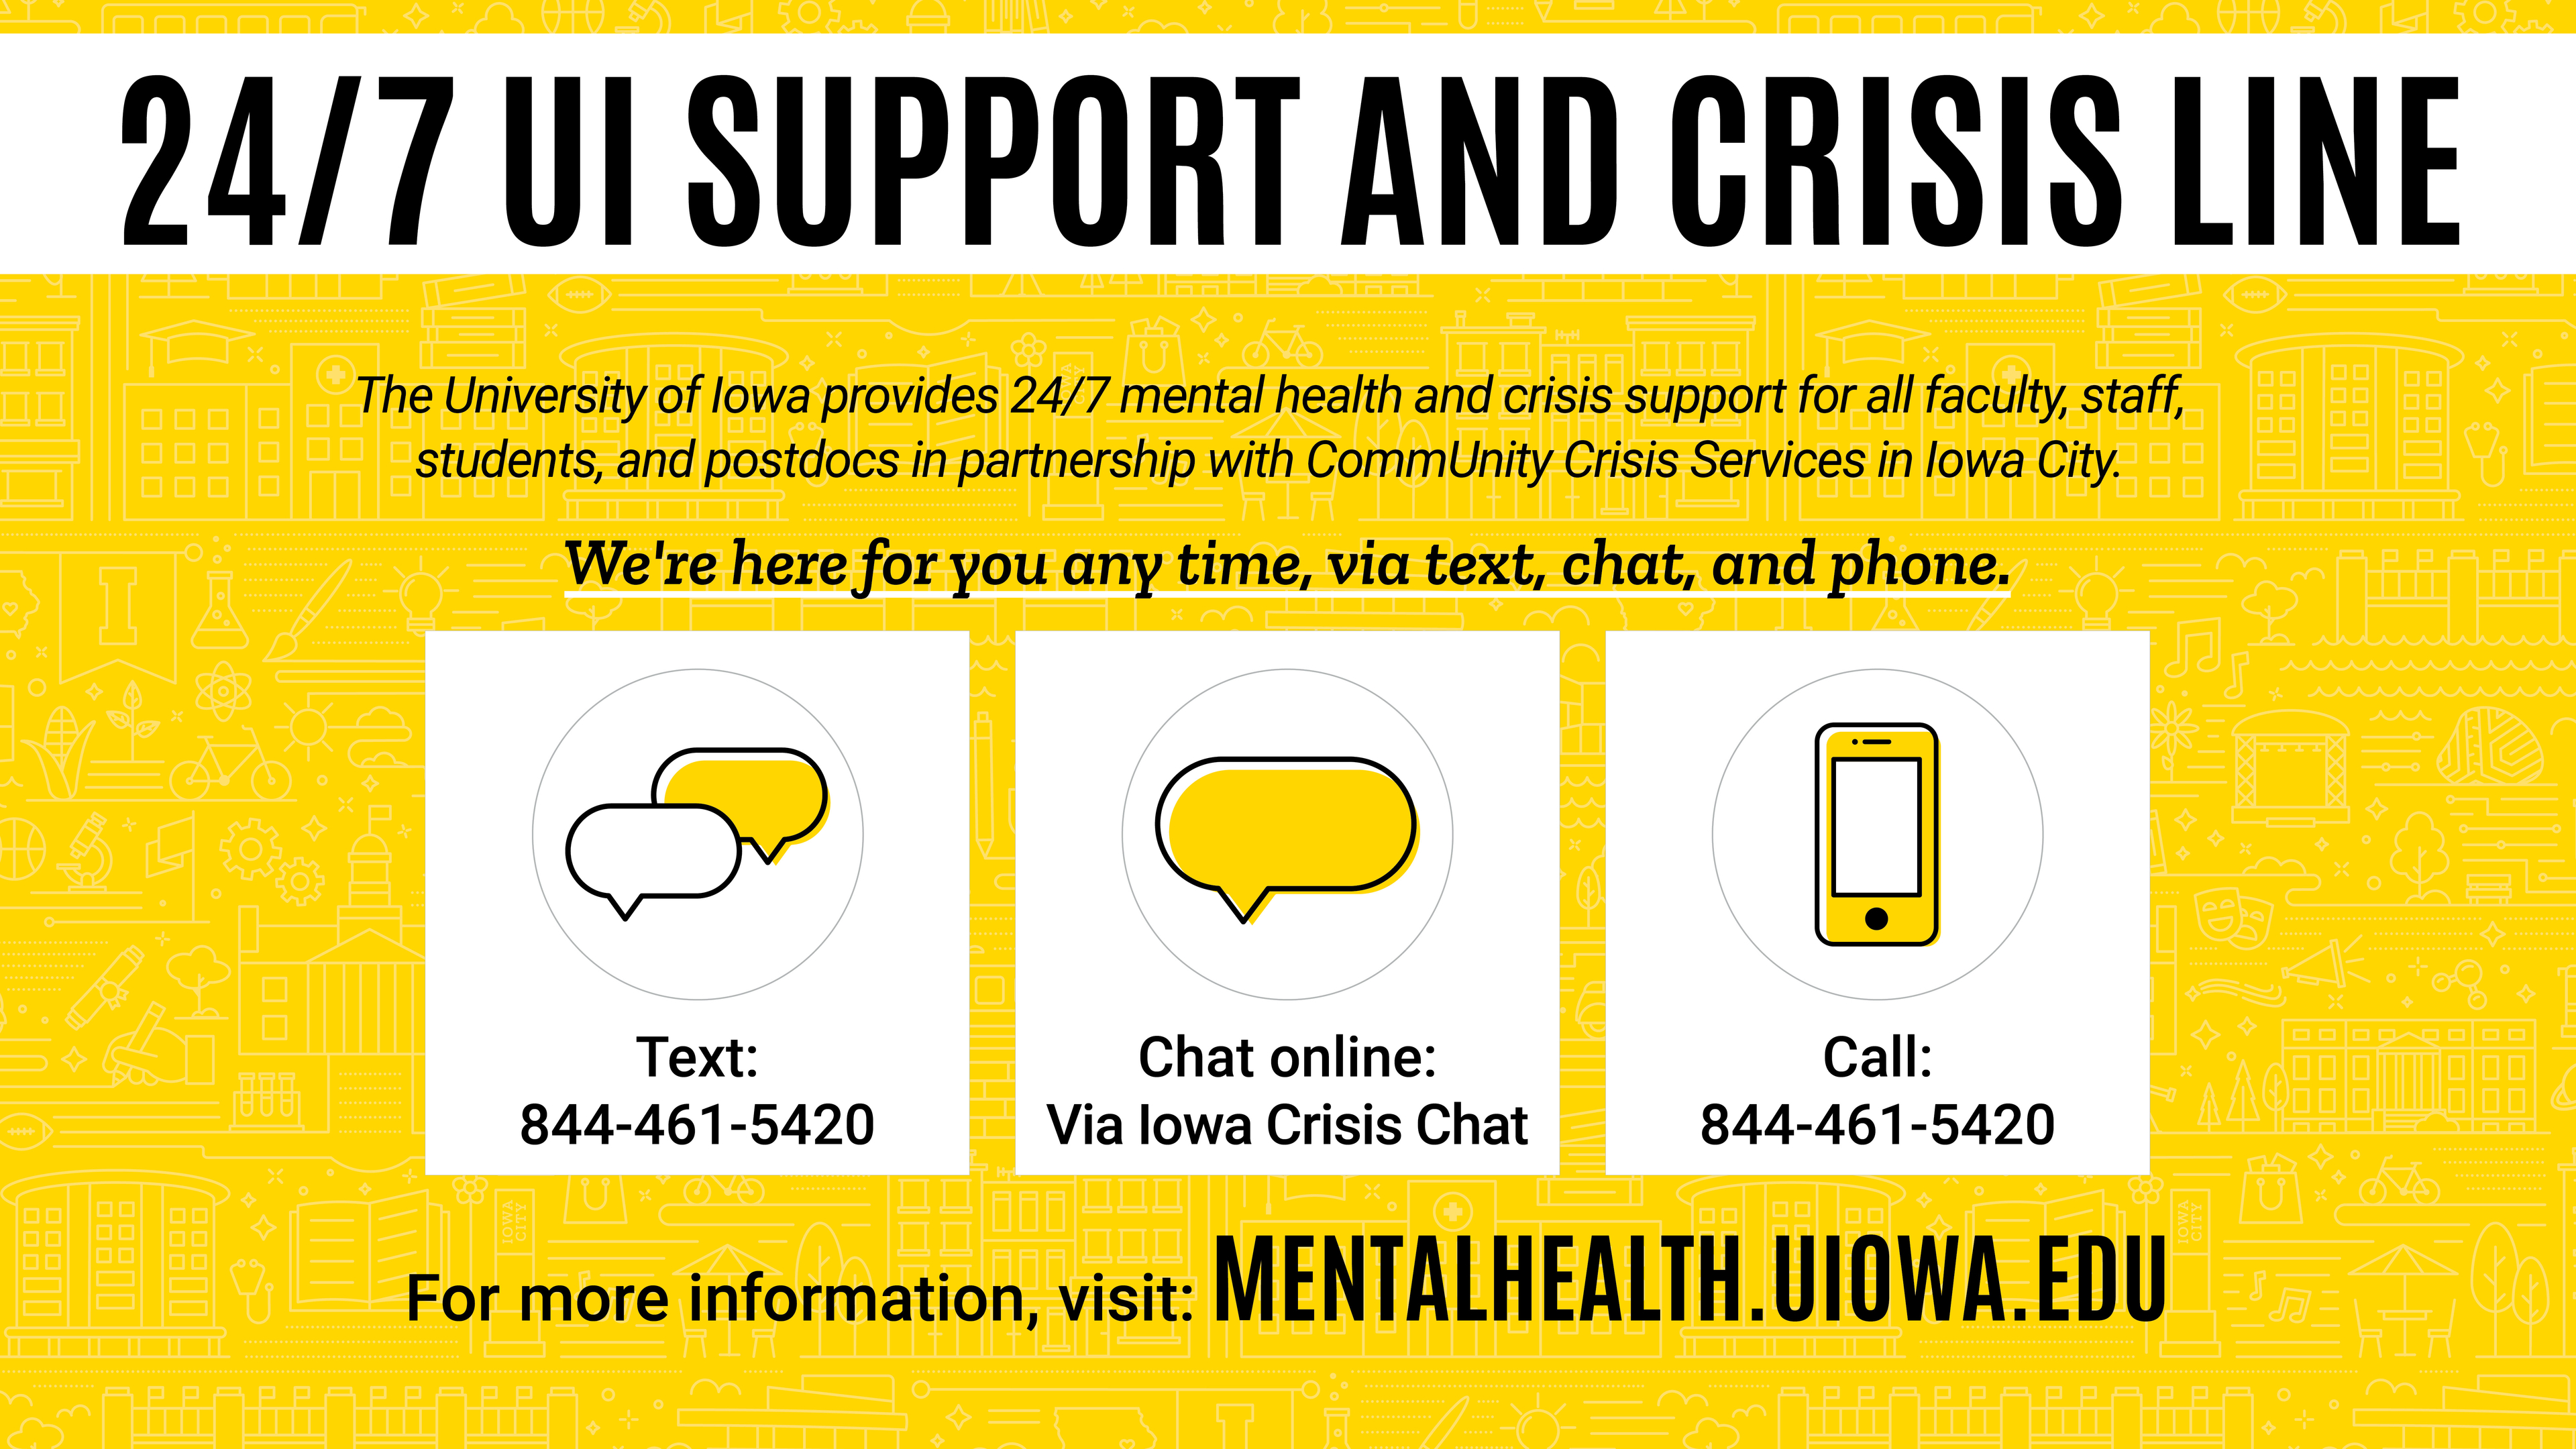 Visit mentalhealth.uiowa.edu for 24/7 crisis support and other services. 